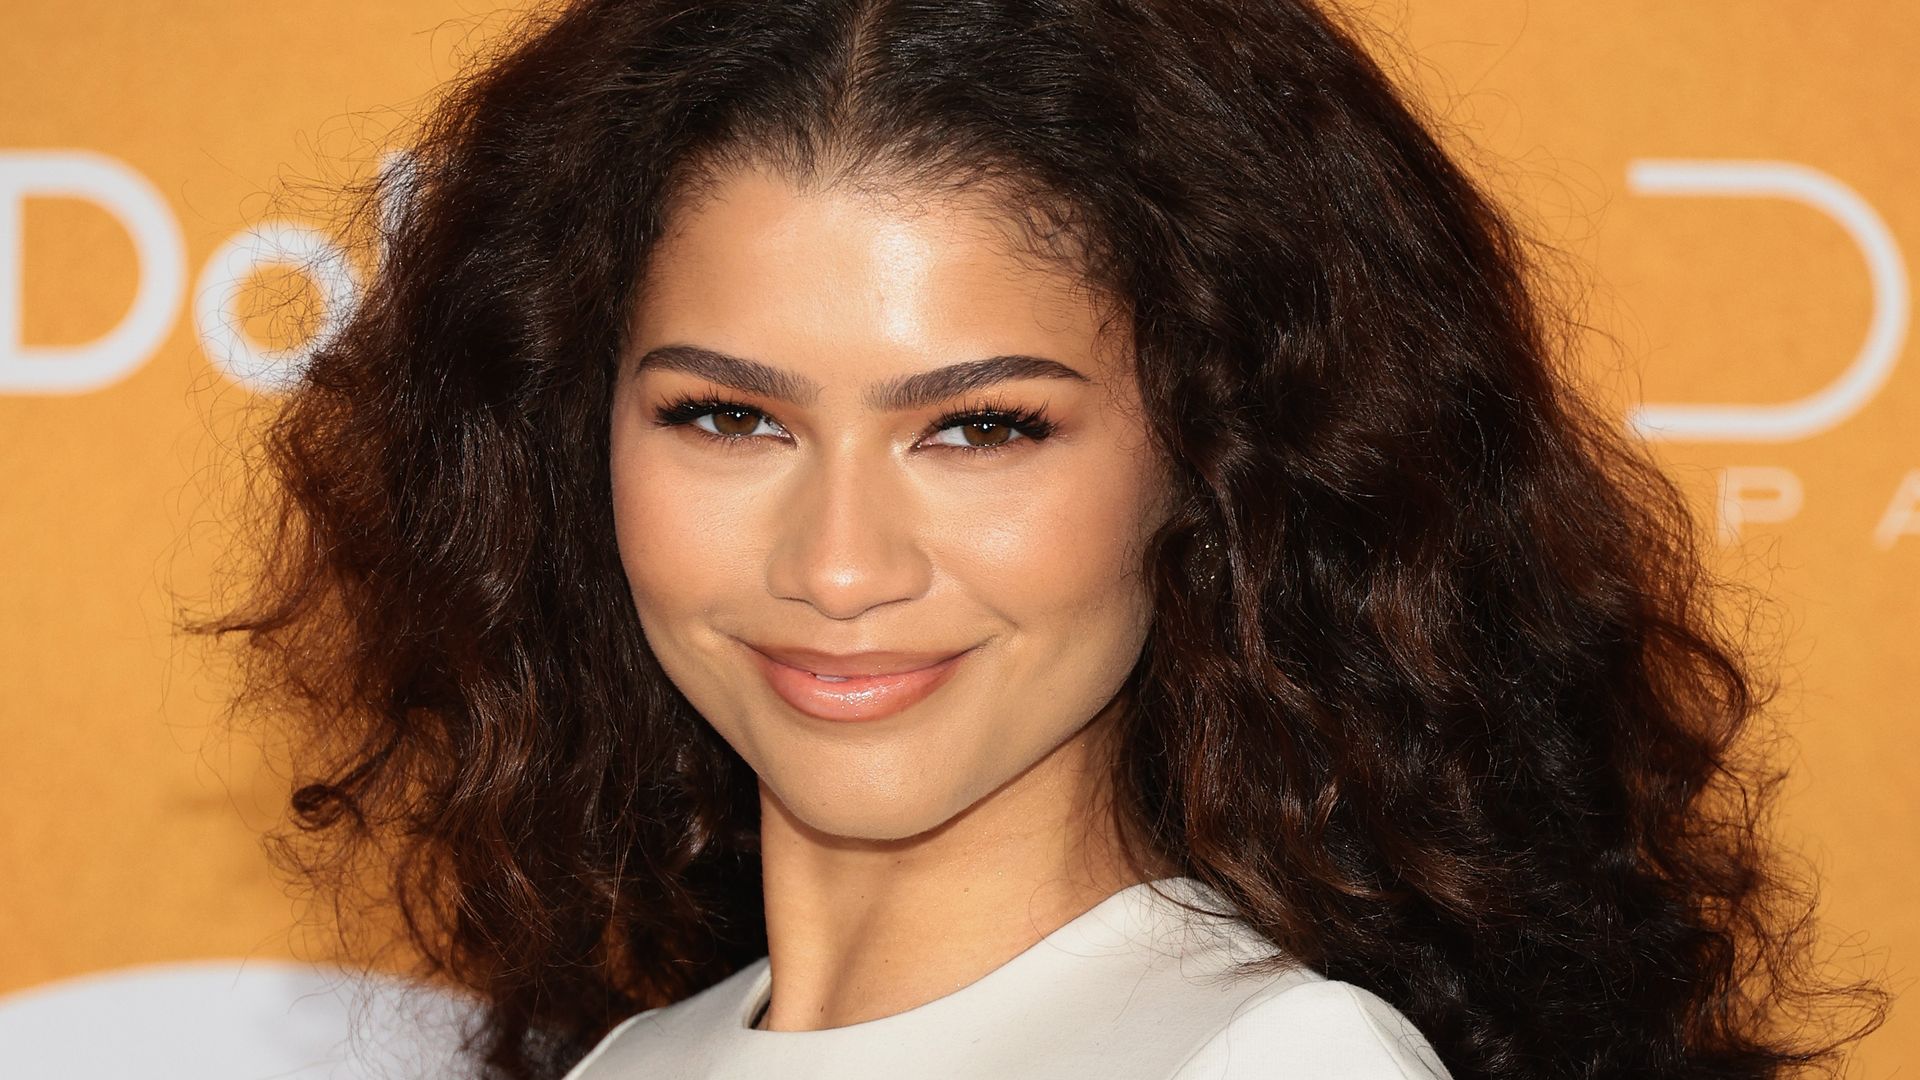 Zendaya turns heads in daring cut out dress at Dune premiere | HELLO!